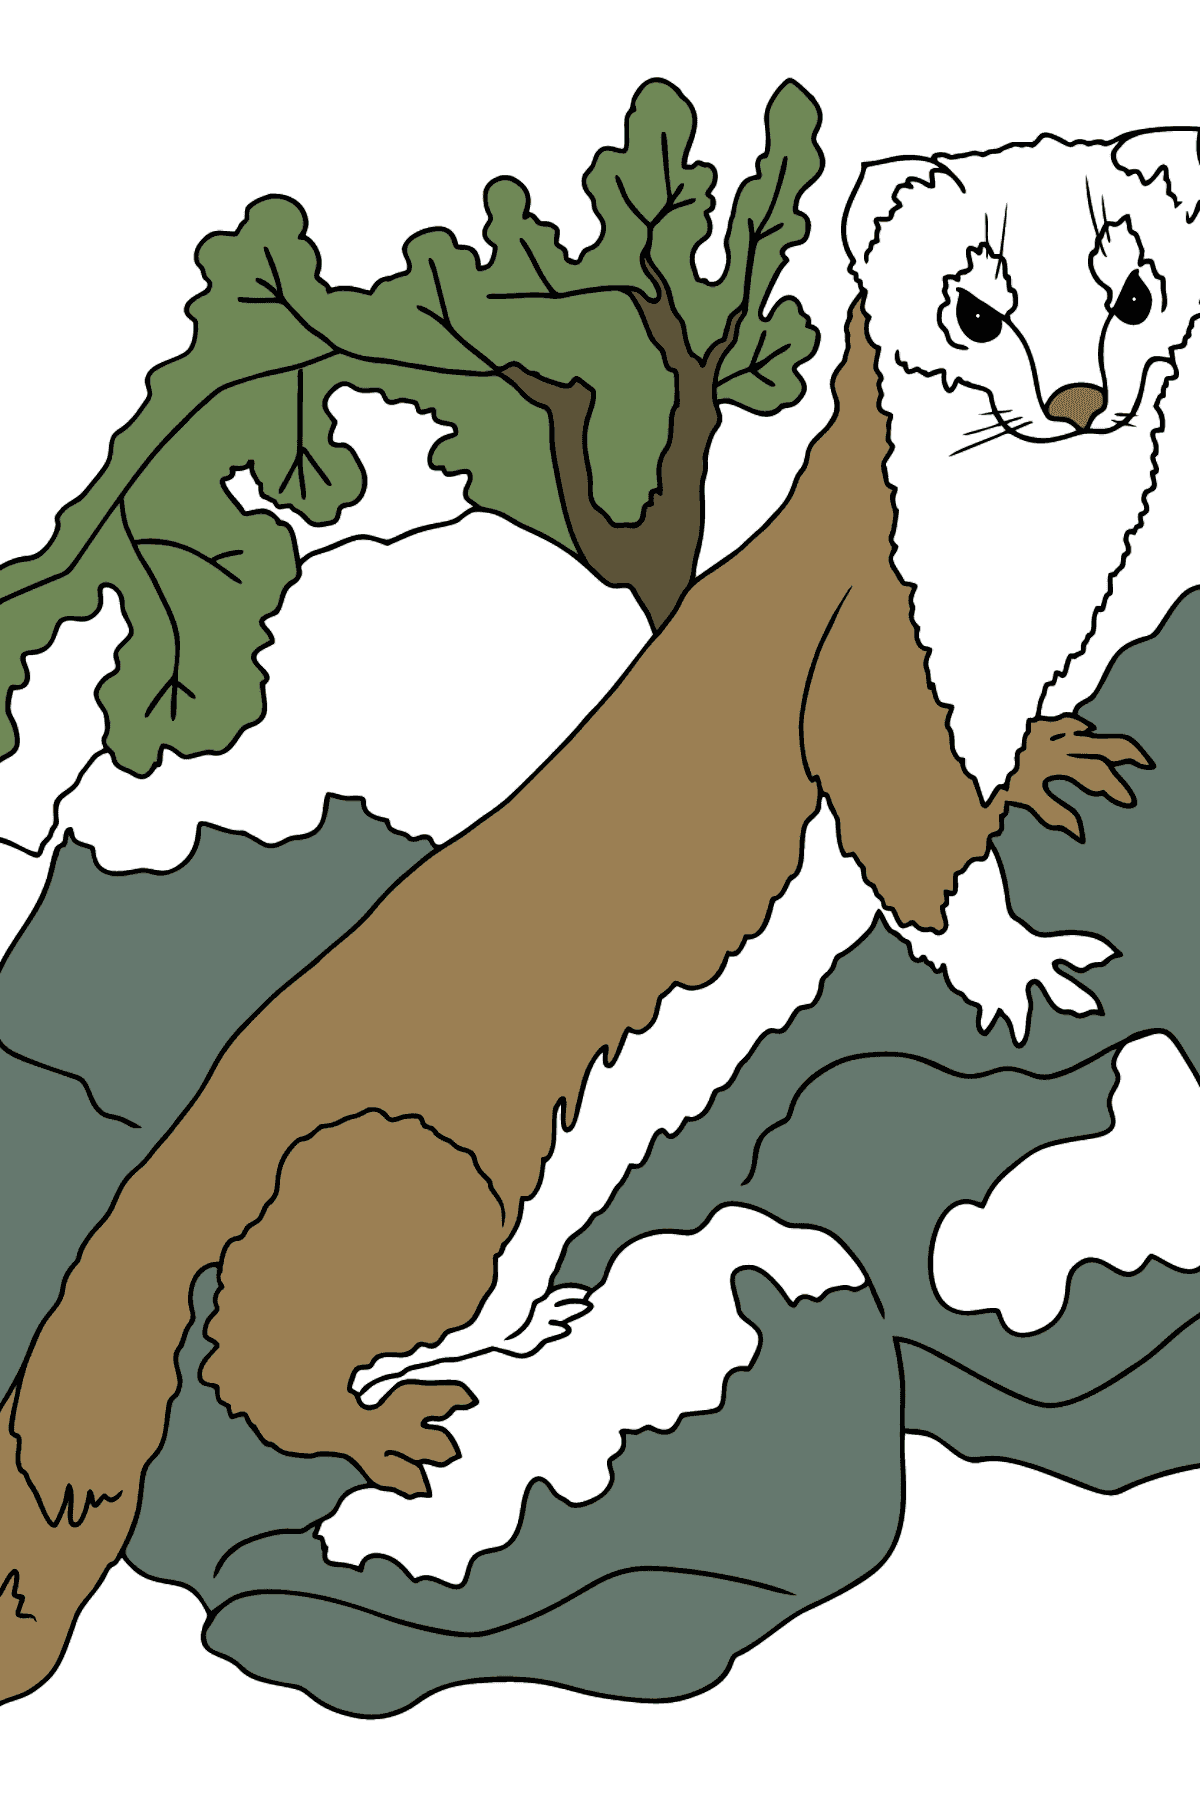 Coloring Page - An Ermine - A Small Predator - Coloring Pages for Kids